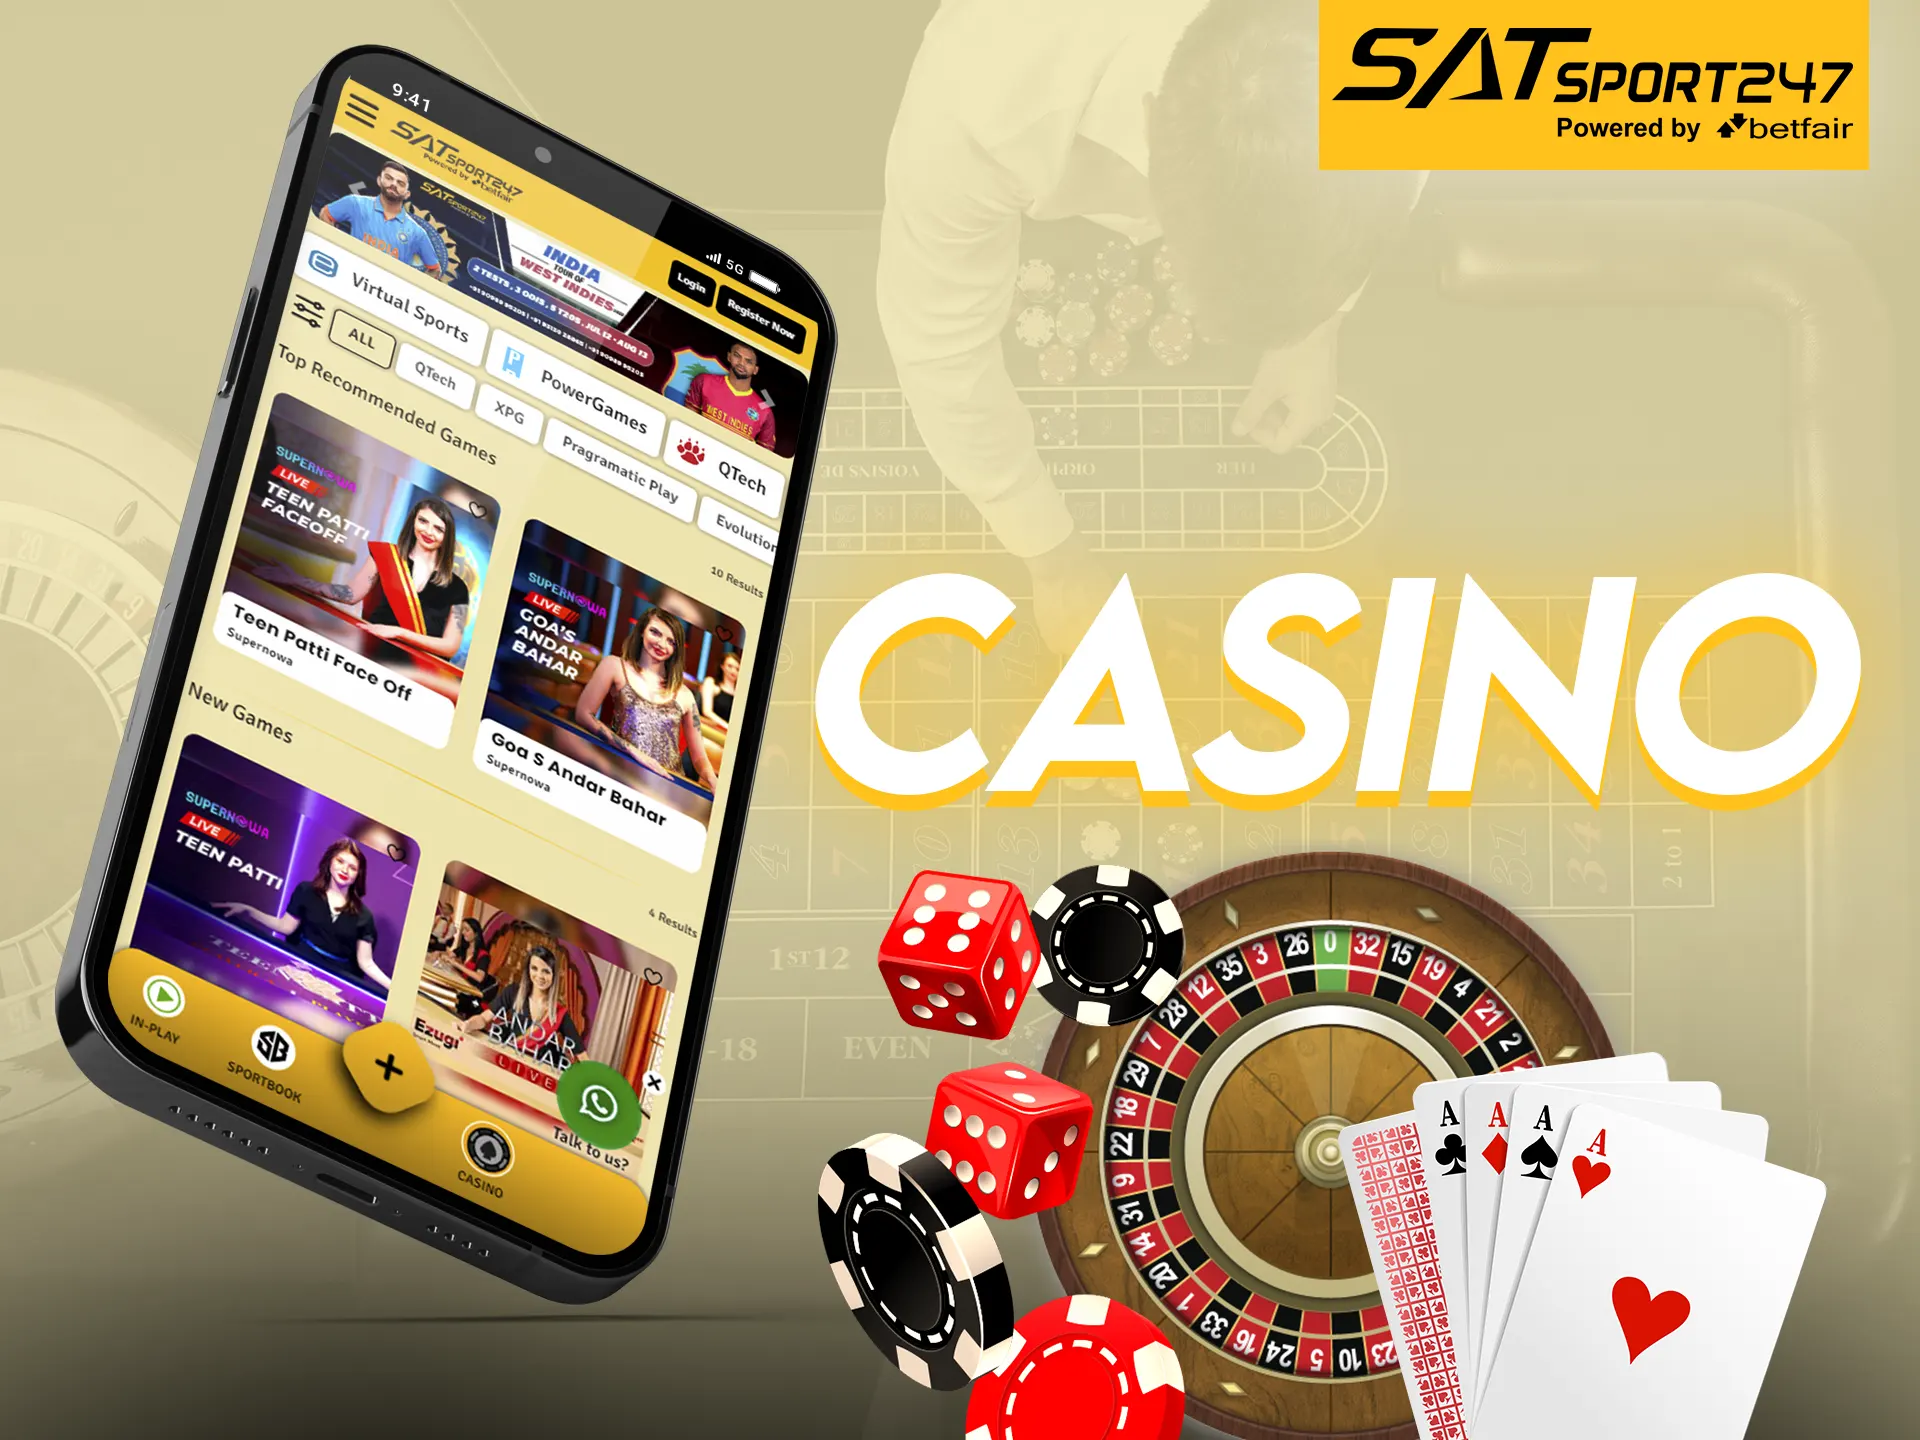 Play at the online casino with Satsport247 app.